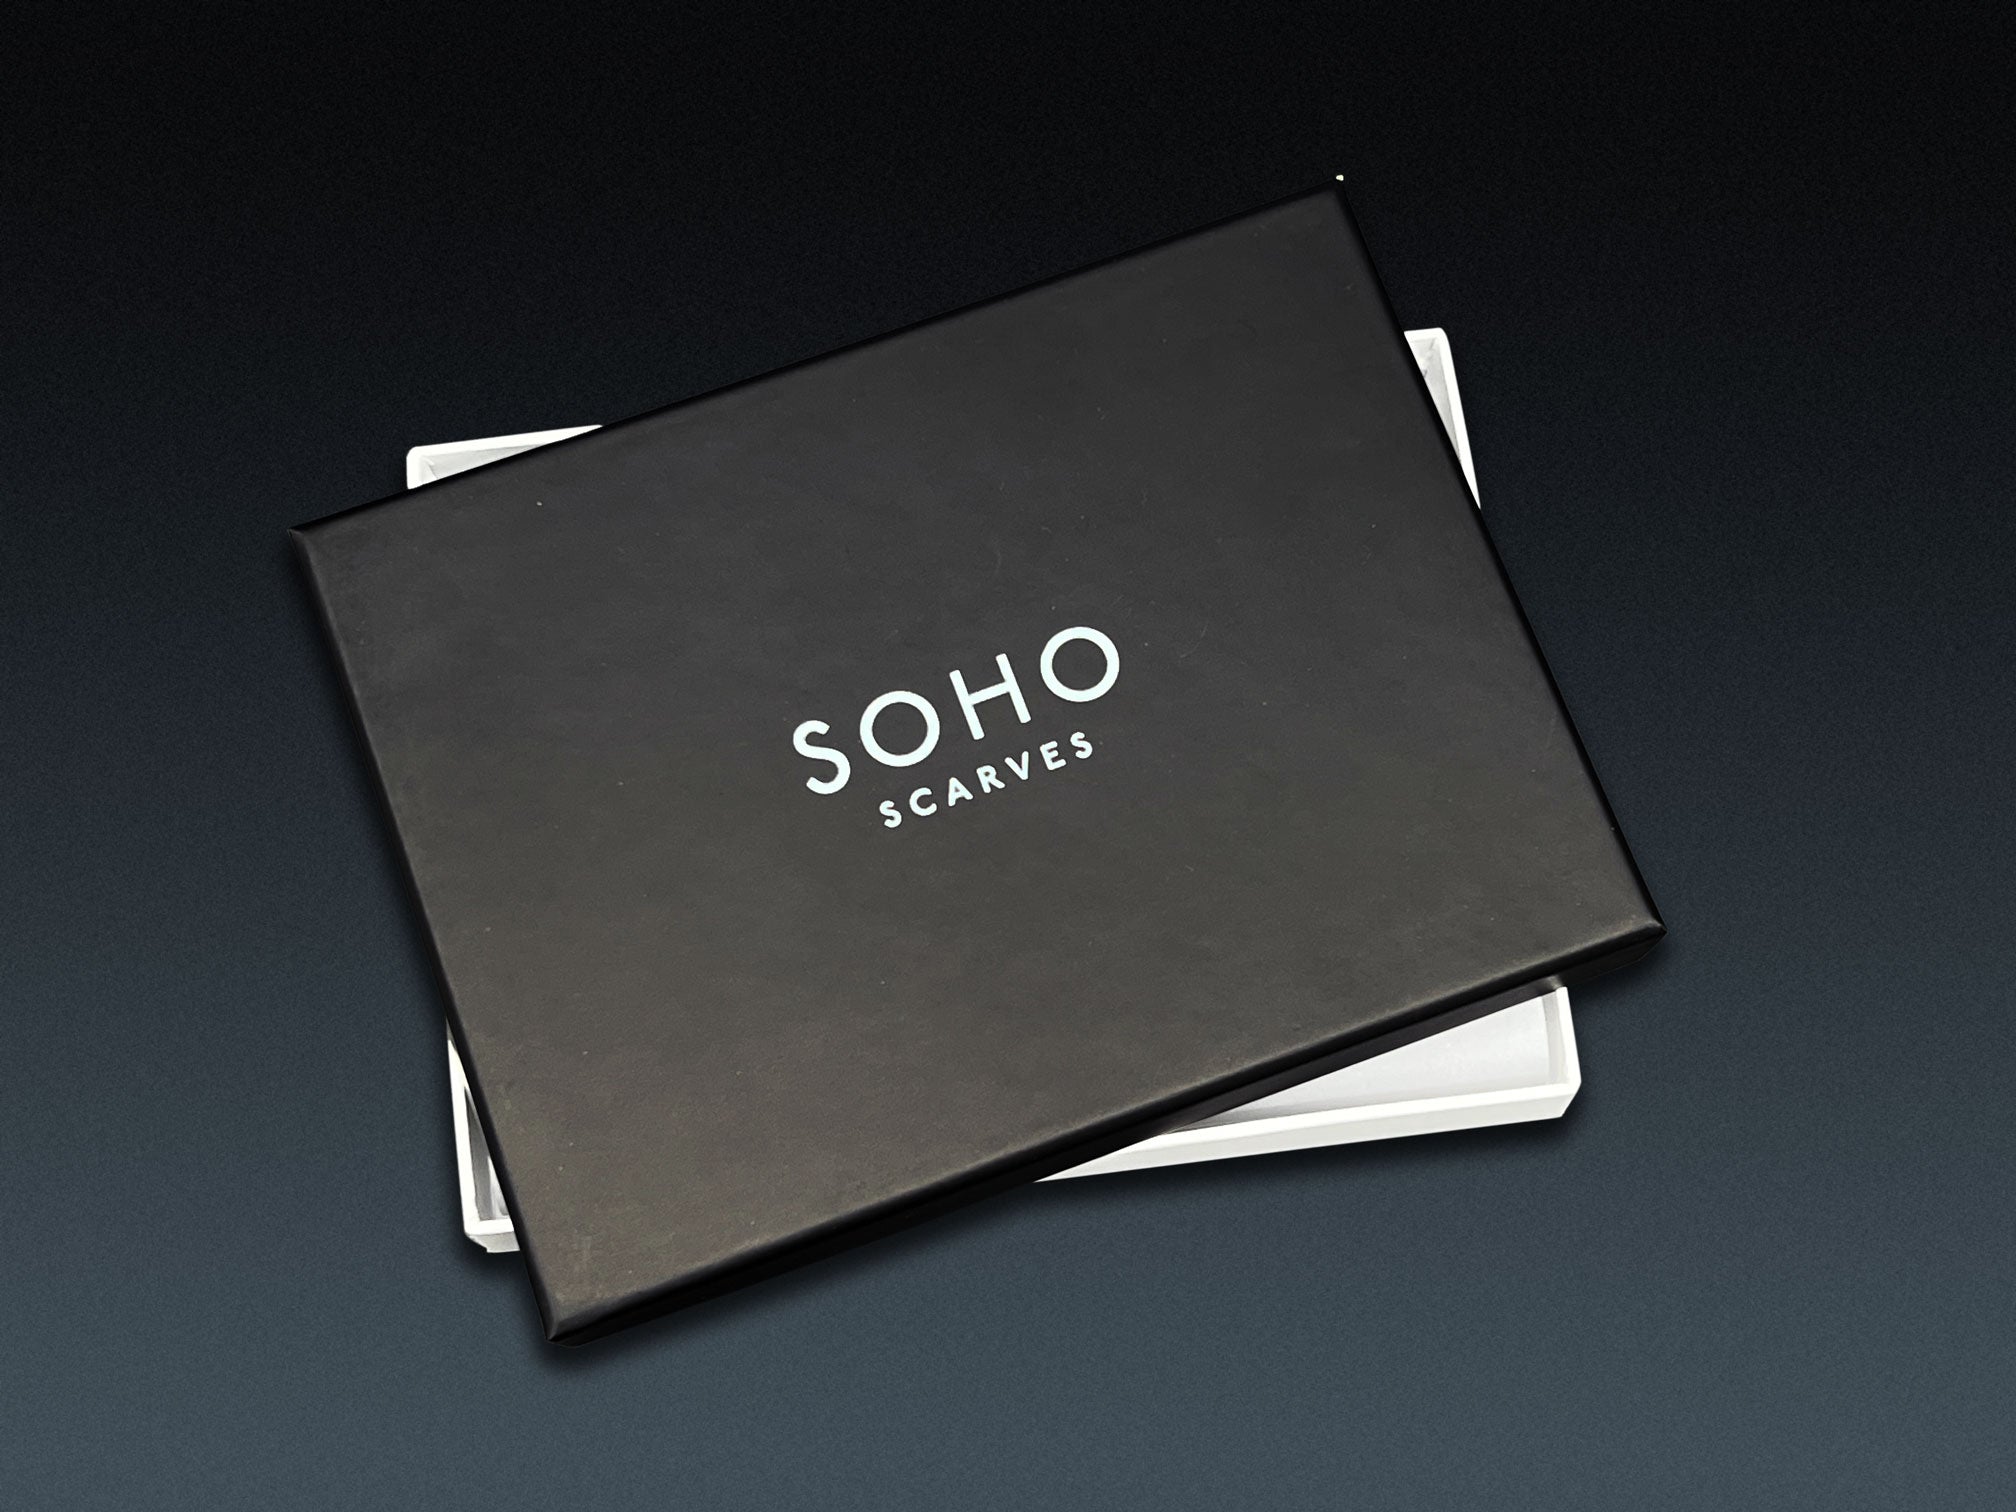 Small deluxe SOHO Scarves gift box for 'The House' neckerchief.